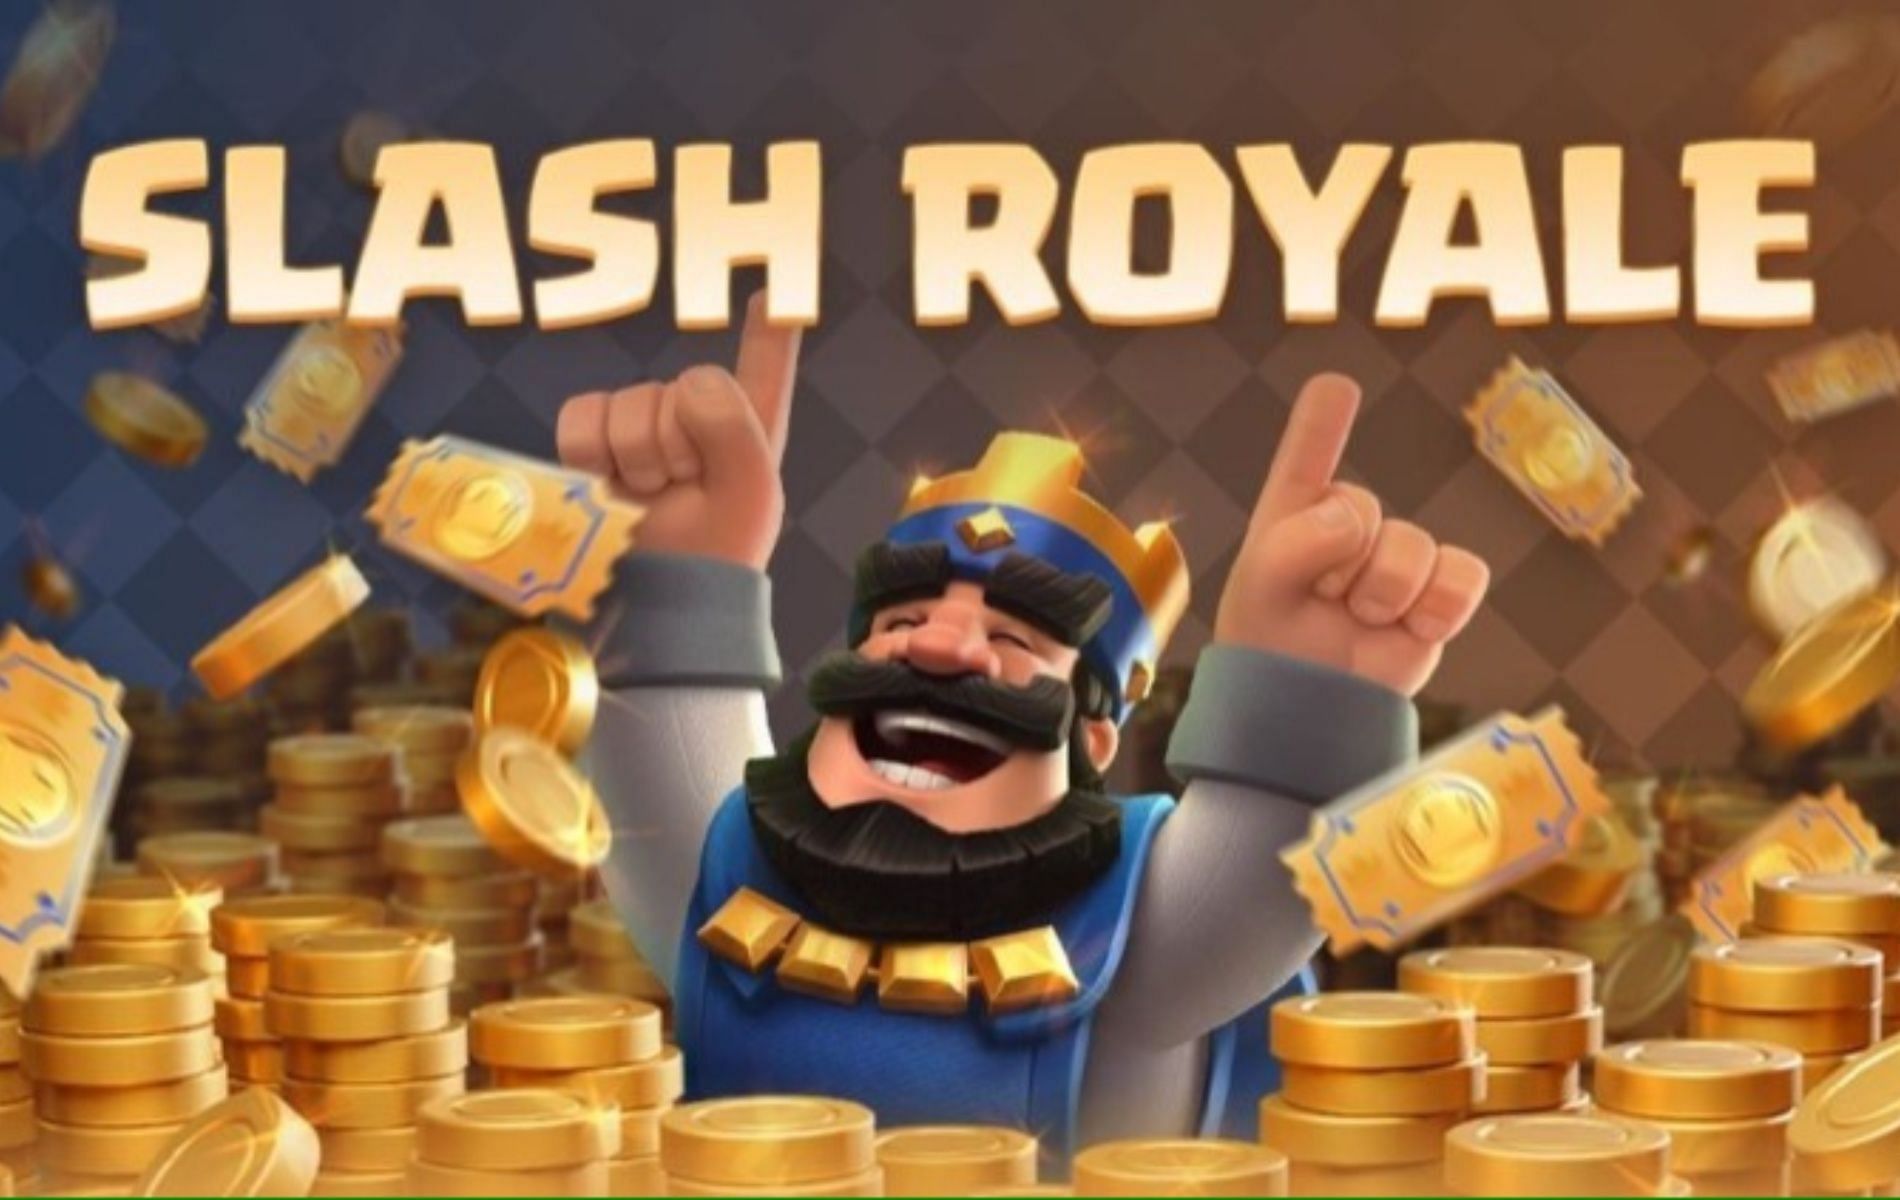 Clash Royale&rsquo;s Slash Royale event returns with a gold rush (Image via Supercell)